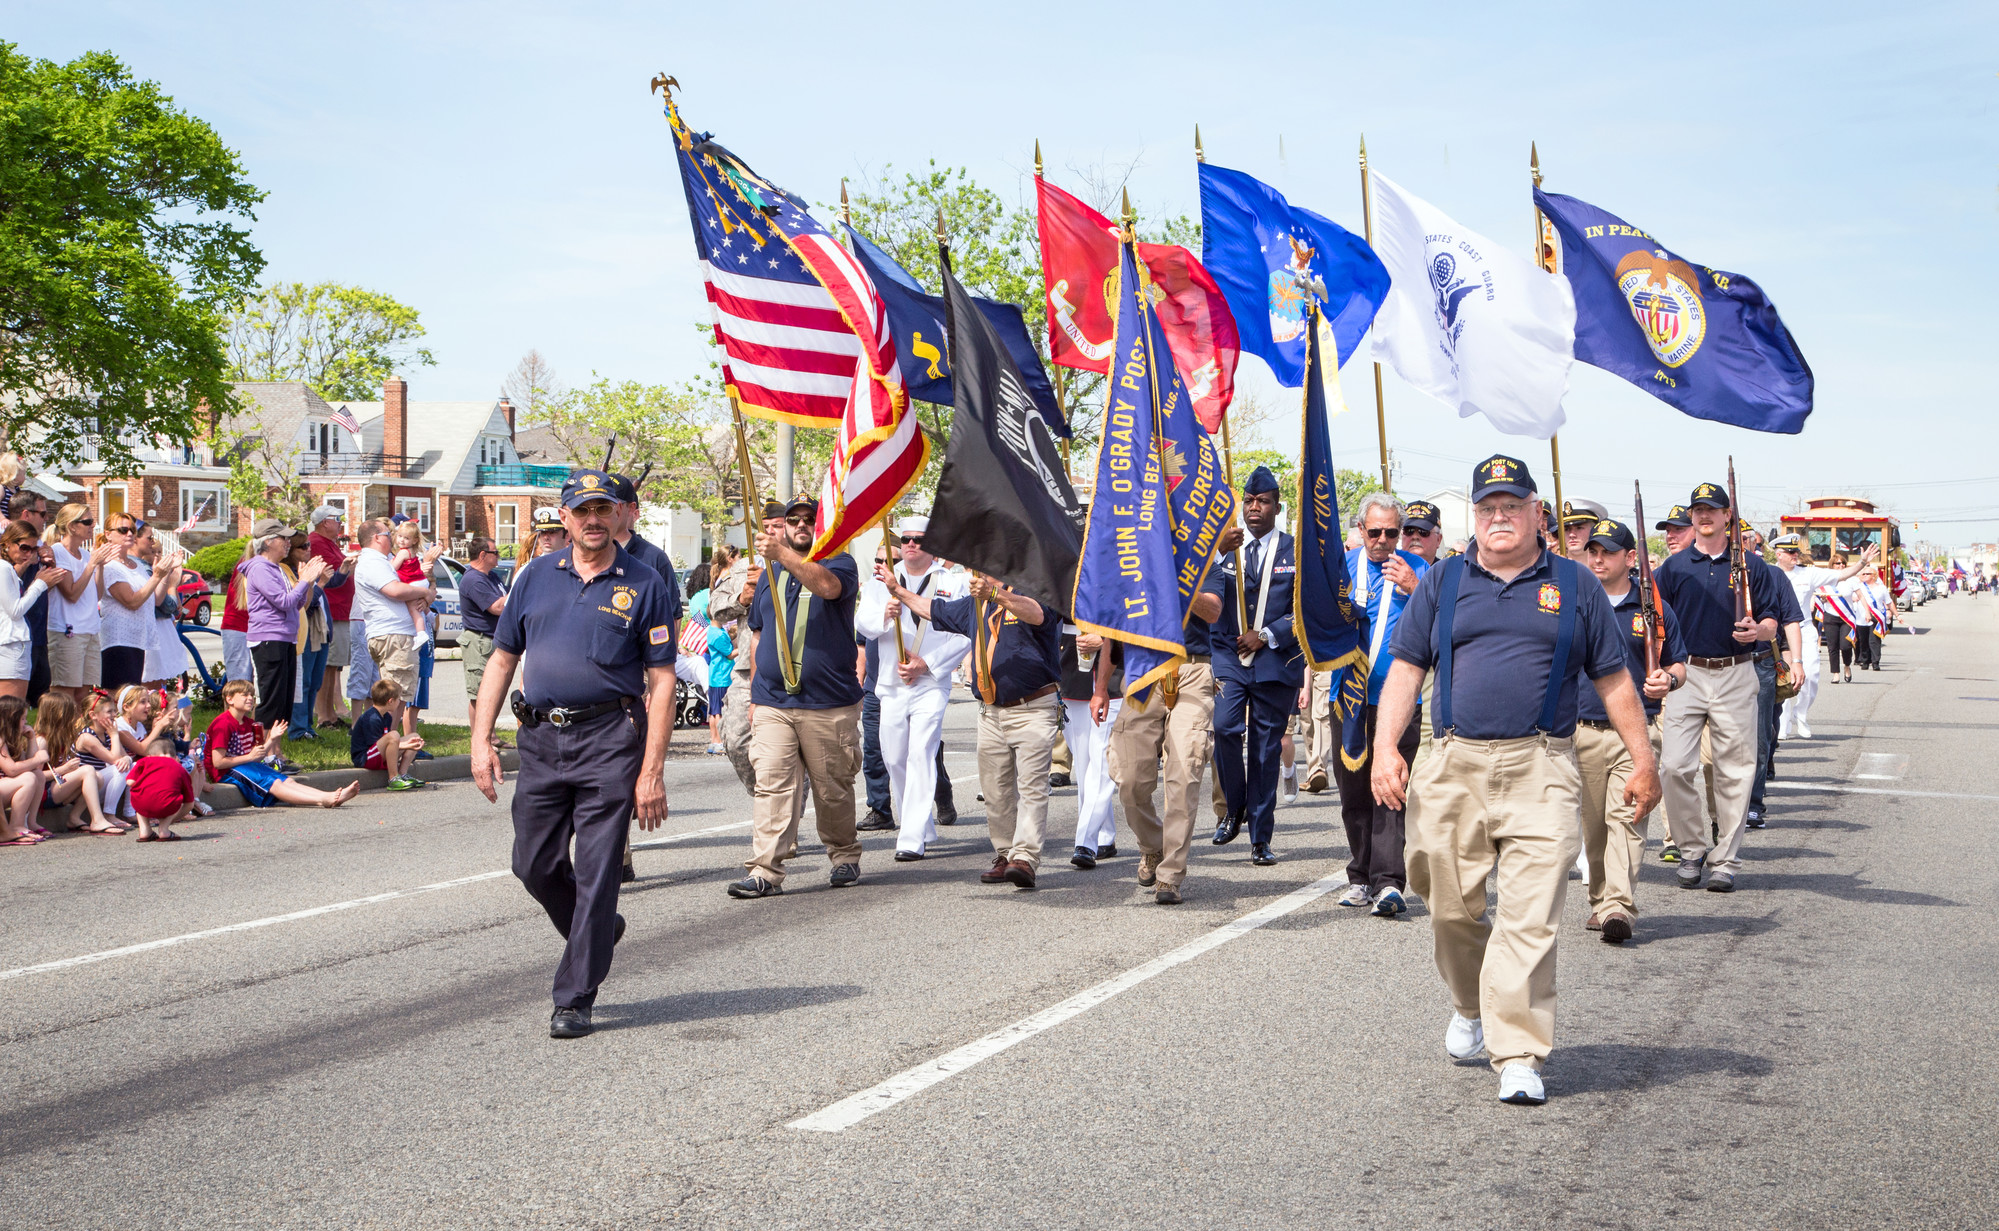 Members of the Lt. John F. O’Grady VFW Post 1384, led by Commander Dan MacPhee, front right, marched in the 2014 Memorial Day Parade. (Kristie Arden/Herald)